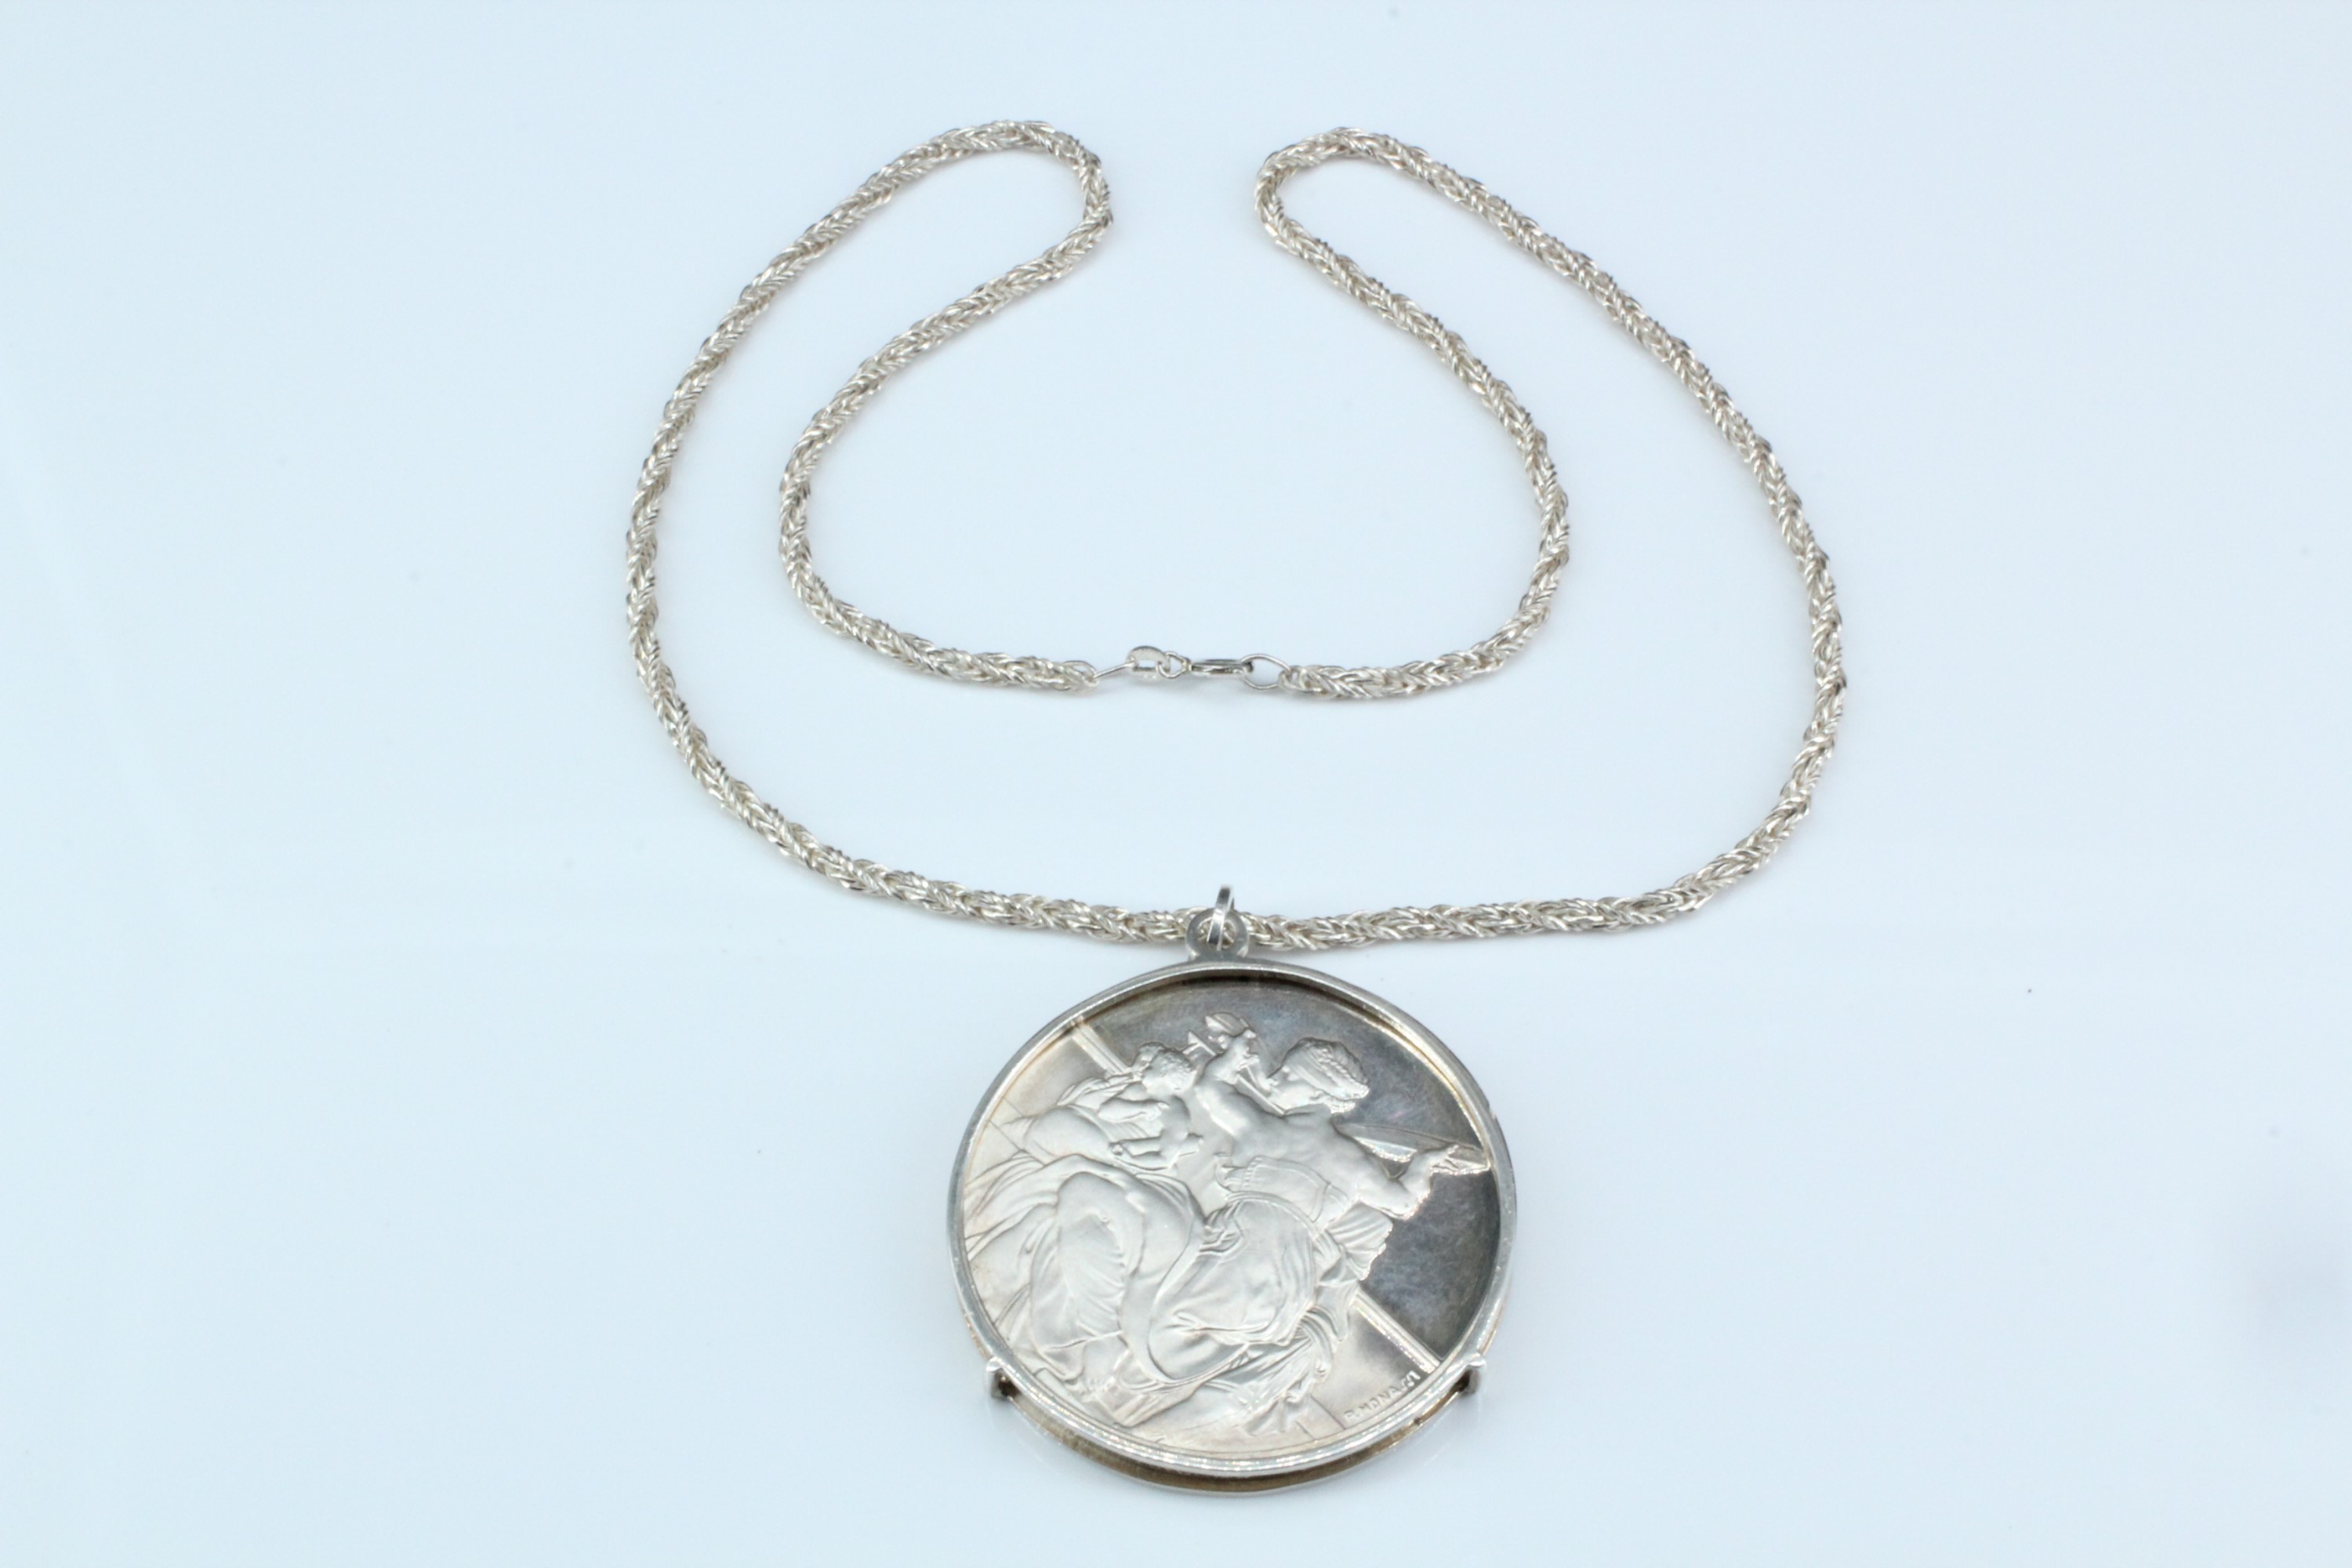 A 1970s Sistine chapel silver medallion necklace, comprising a medallion from the "Genius of